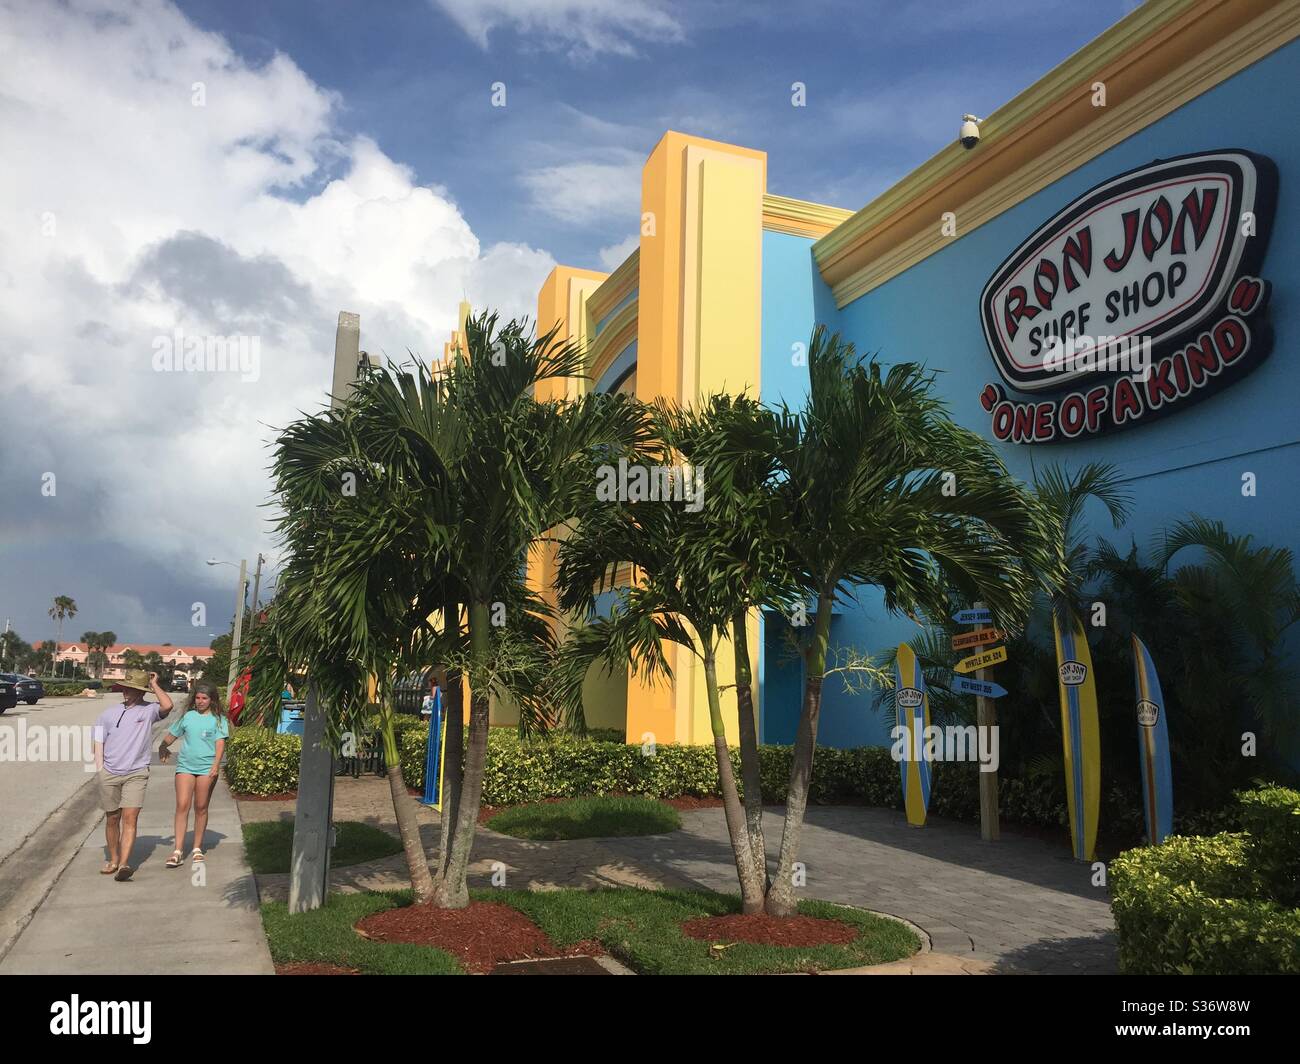 Cocoa Beach, Florida / USA - June 1, 2020: A man and woman walk past the iconic Ron Jon Surf Shop flagship store in this popular Florida beach town. Stock Photo